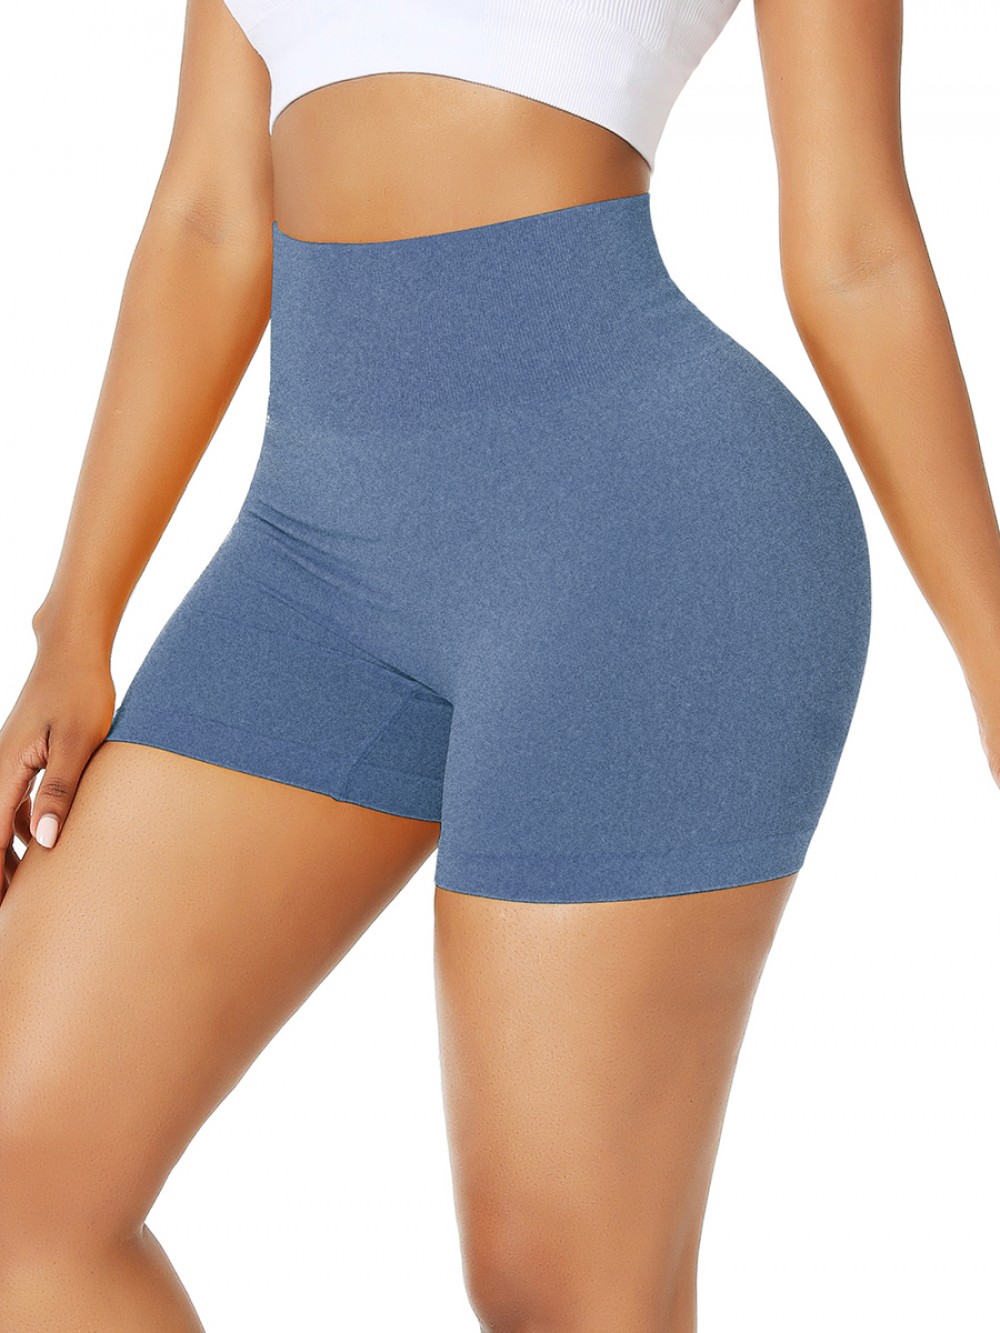 Blue Slim Sports Shorts Thigh Length Solid Color Workout Apparel